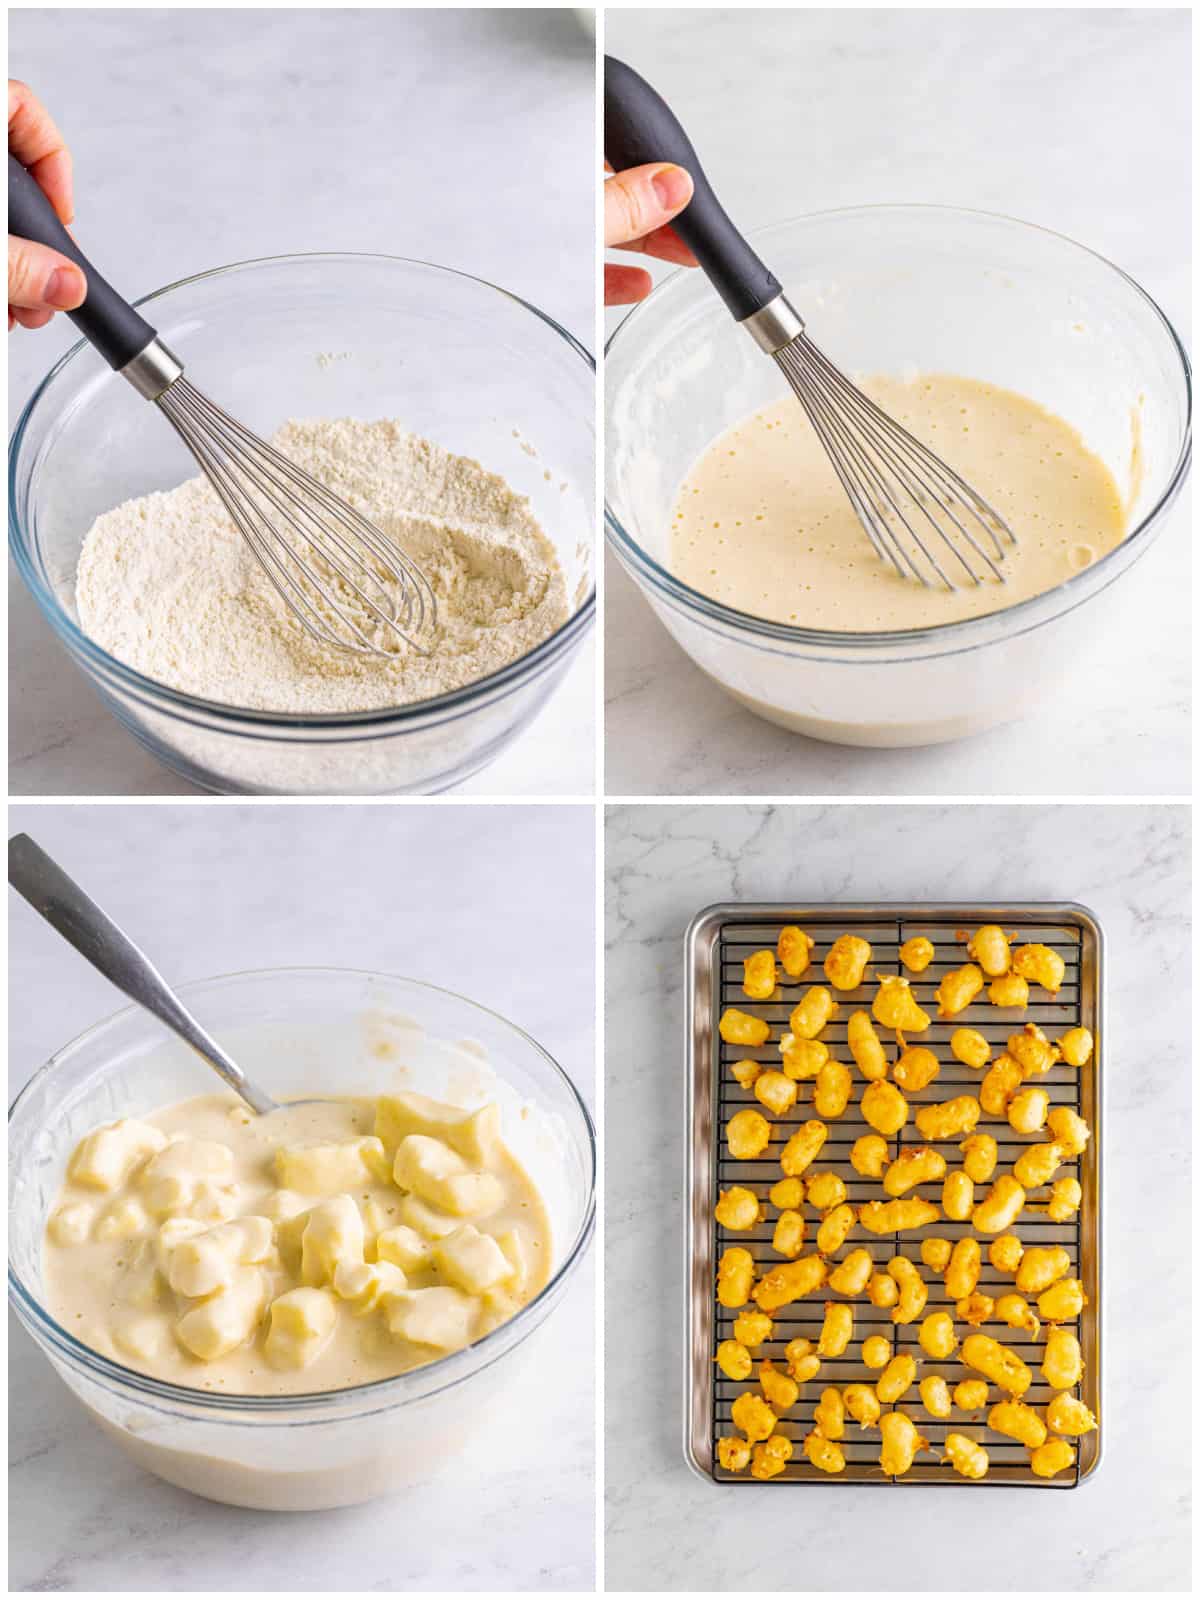 Step by step photos on how to make Fried Cheese Curds.